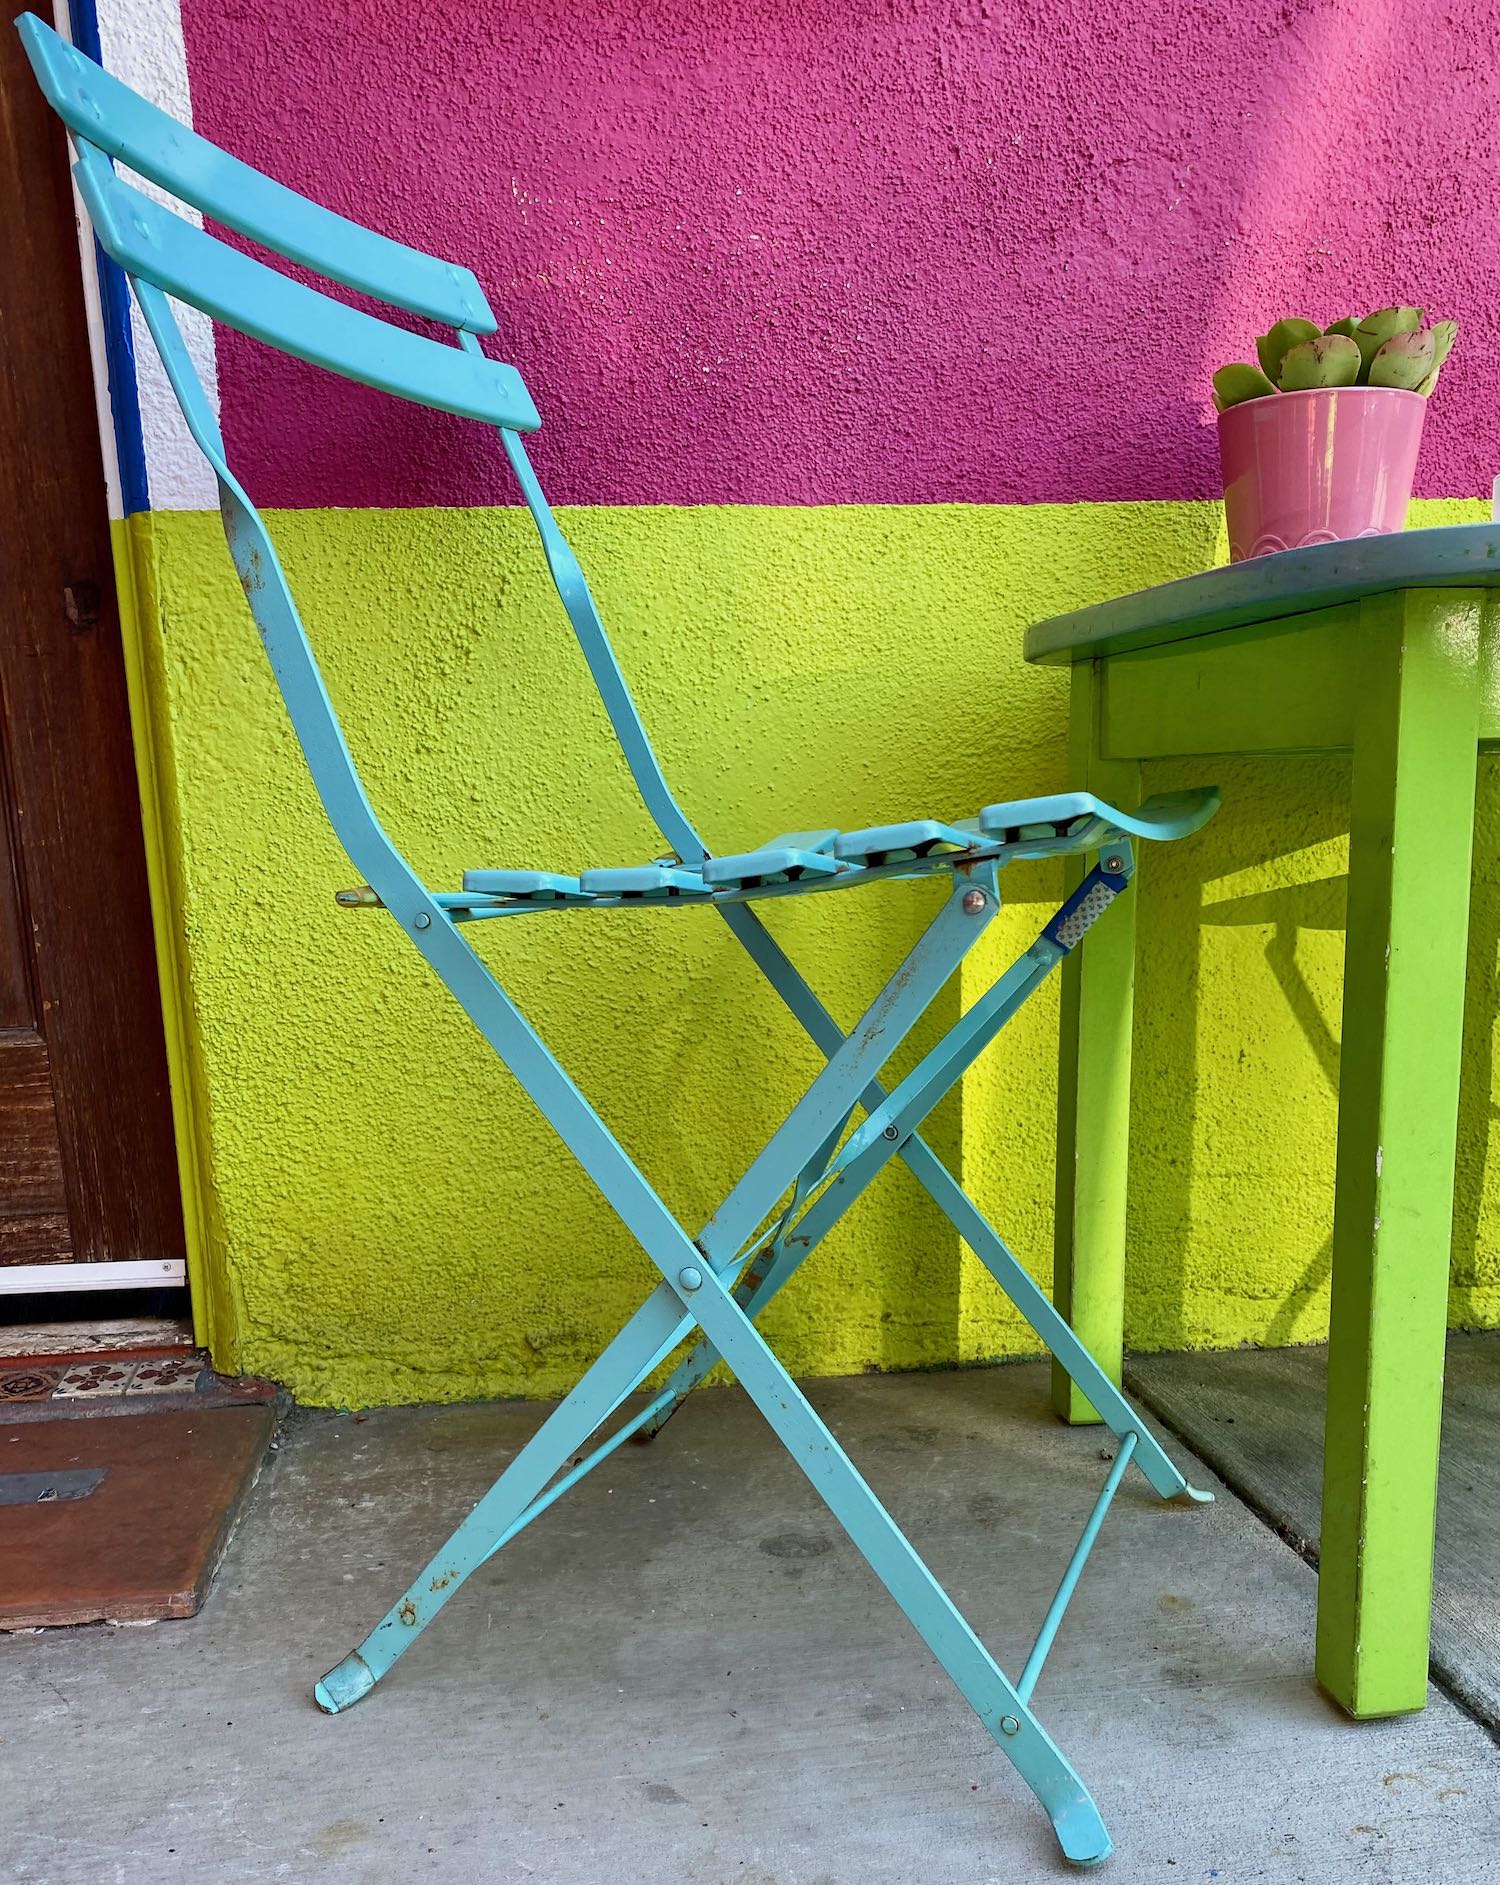 Robin's Egg Blue Chair with Pink and Chartreuse Walls